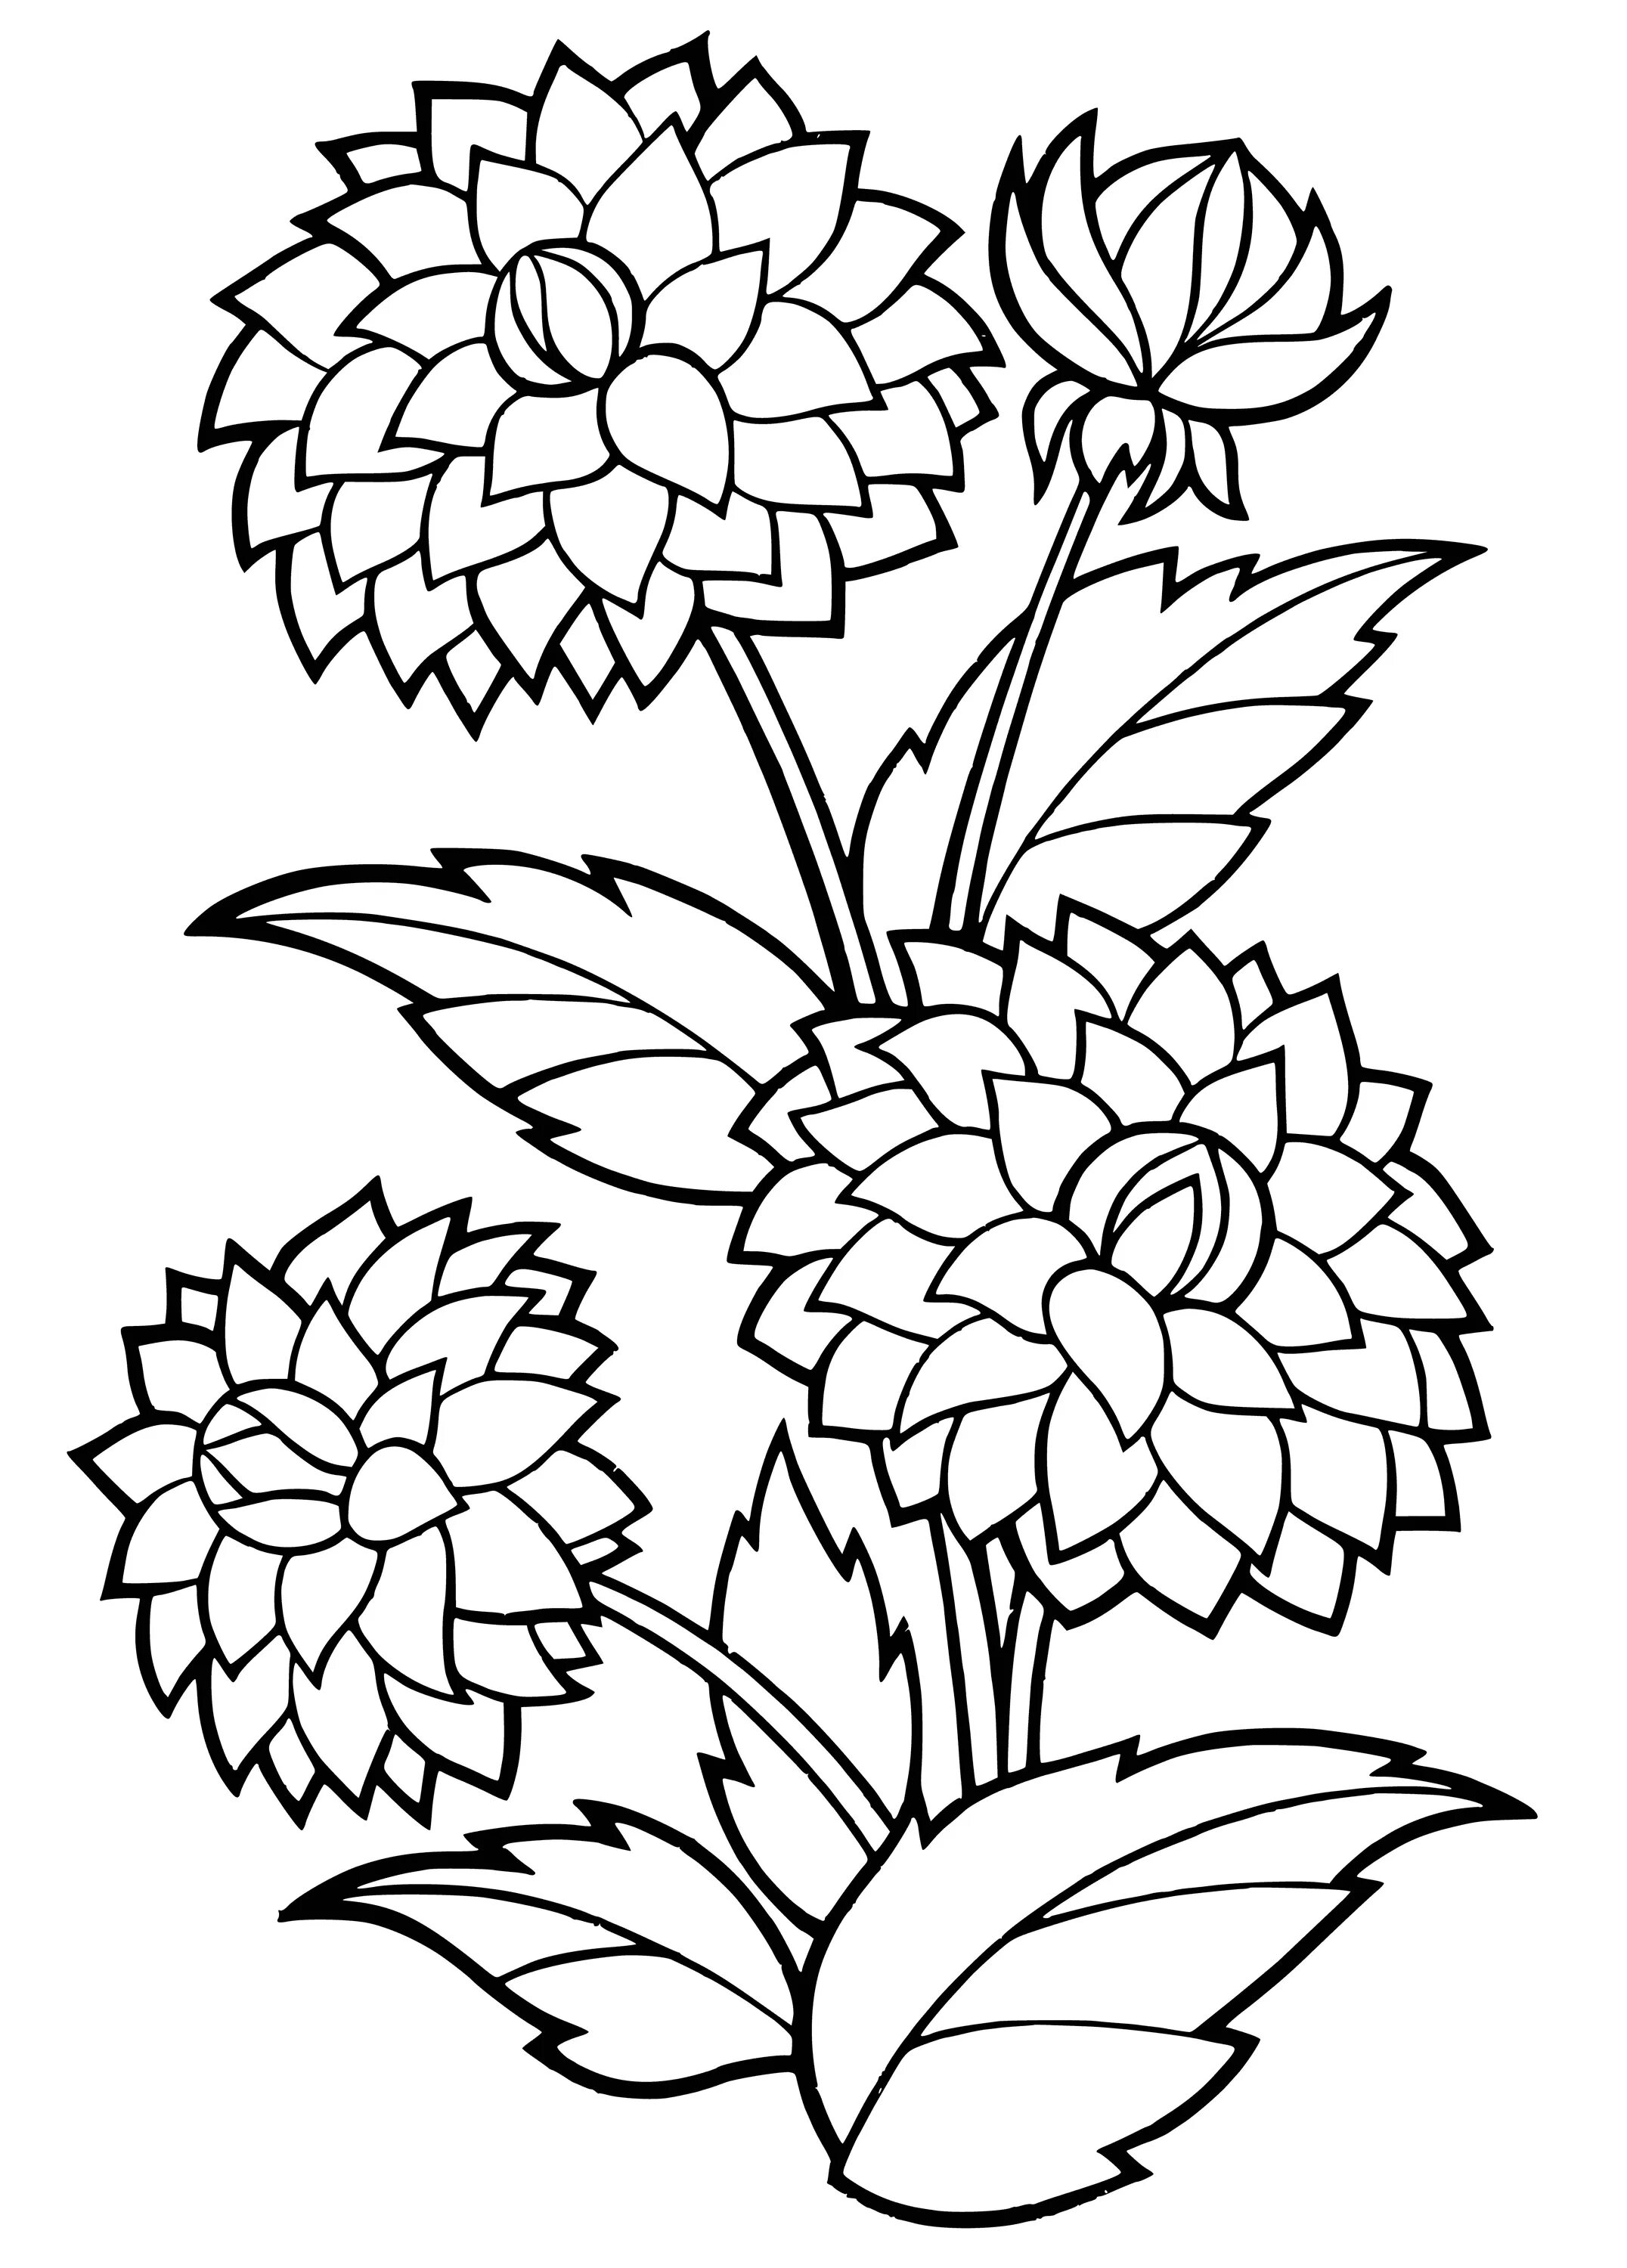 Intricate dahlia coloring page